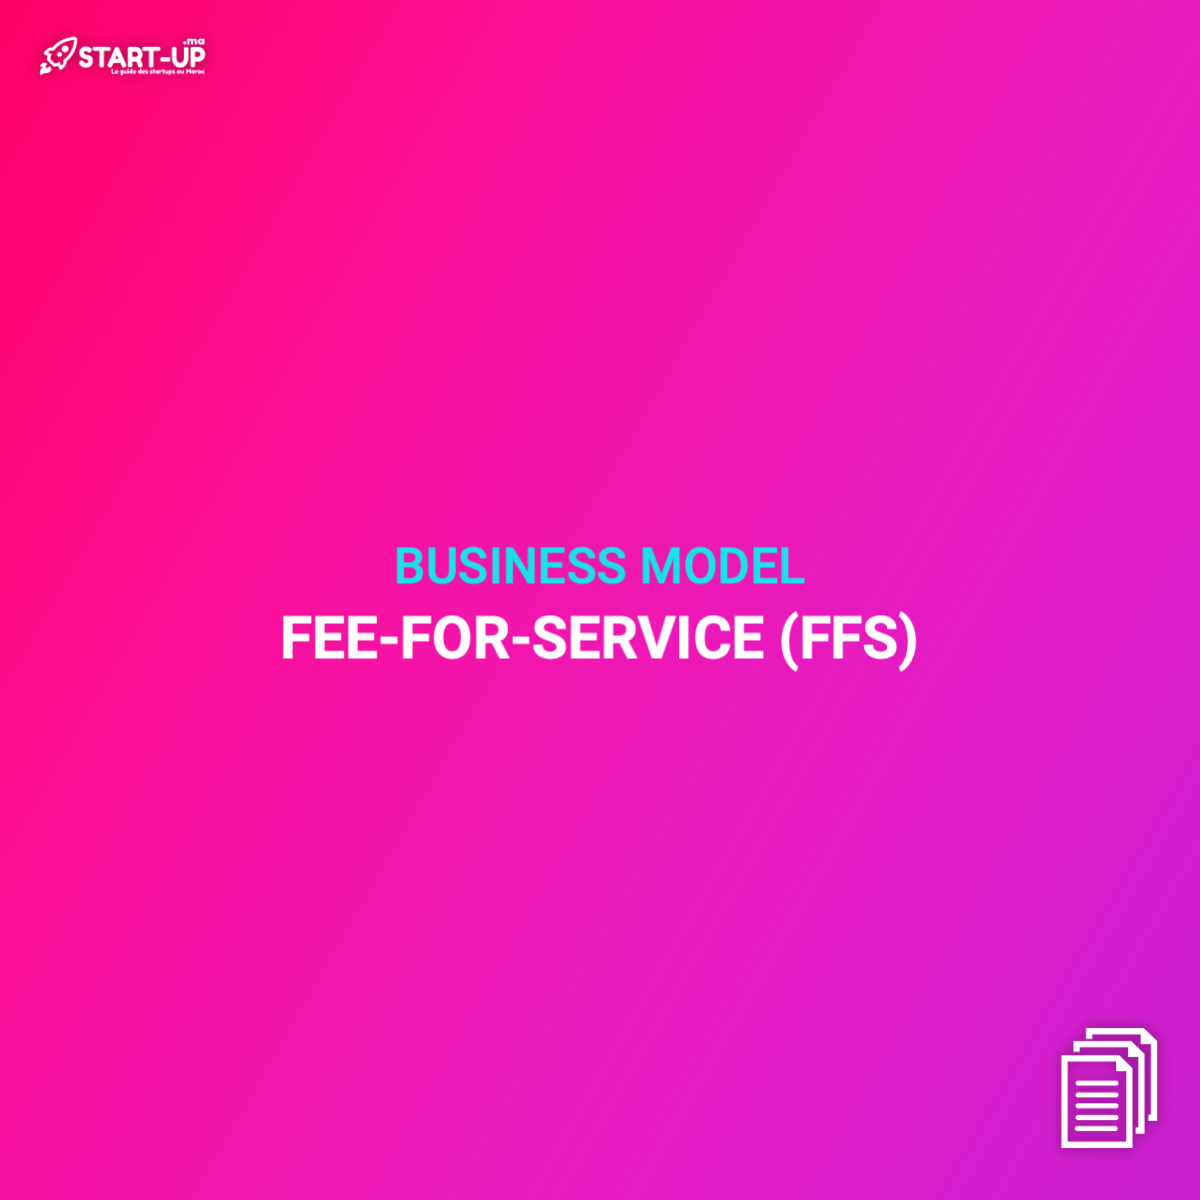 Fee-For-Service (FFS) Business Model